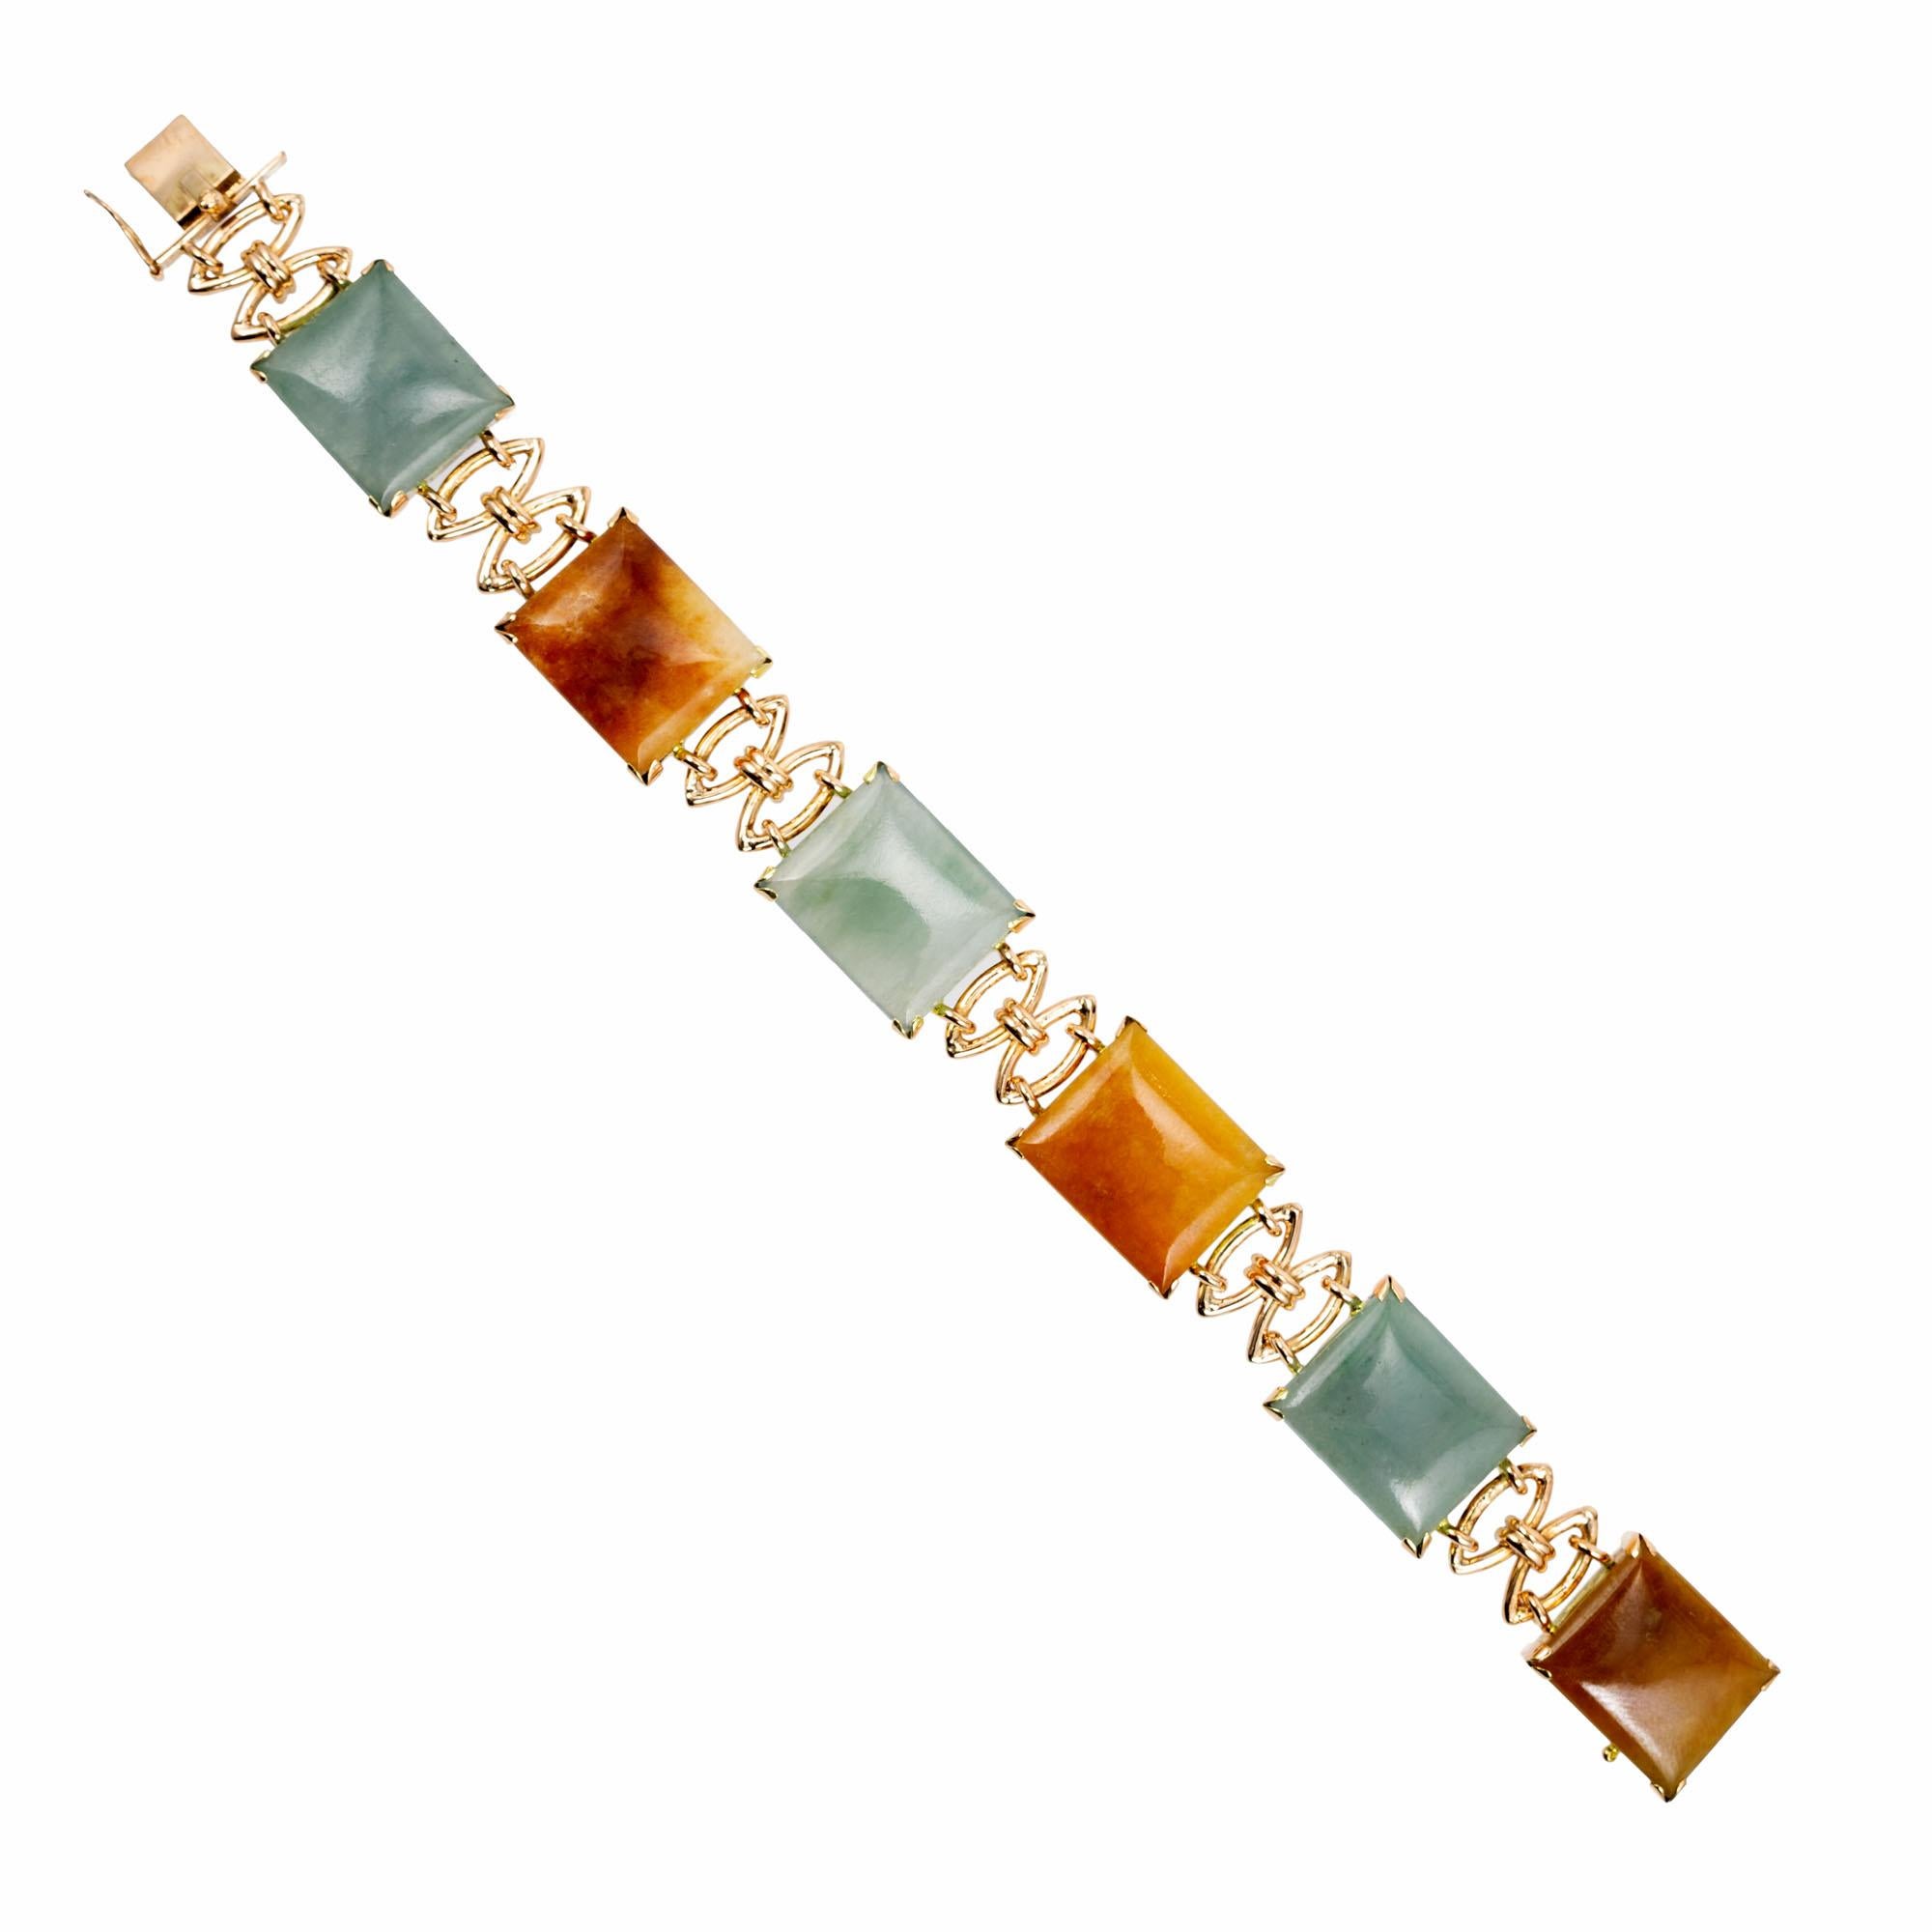 Natural Jadeite Jade bracelet with built in box catch and figure 8 safety. GIA certified with green natural color Jade and brownish orange Jade. 14k yellow gold 

3 rectangular brownish green Jadeite Jade, approx. total weight 21.00cts, translucent,